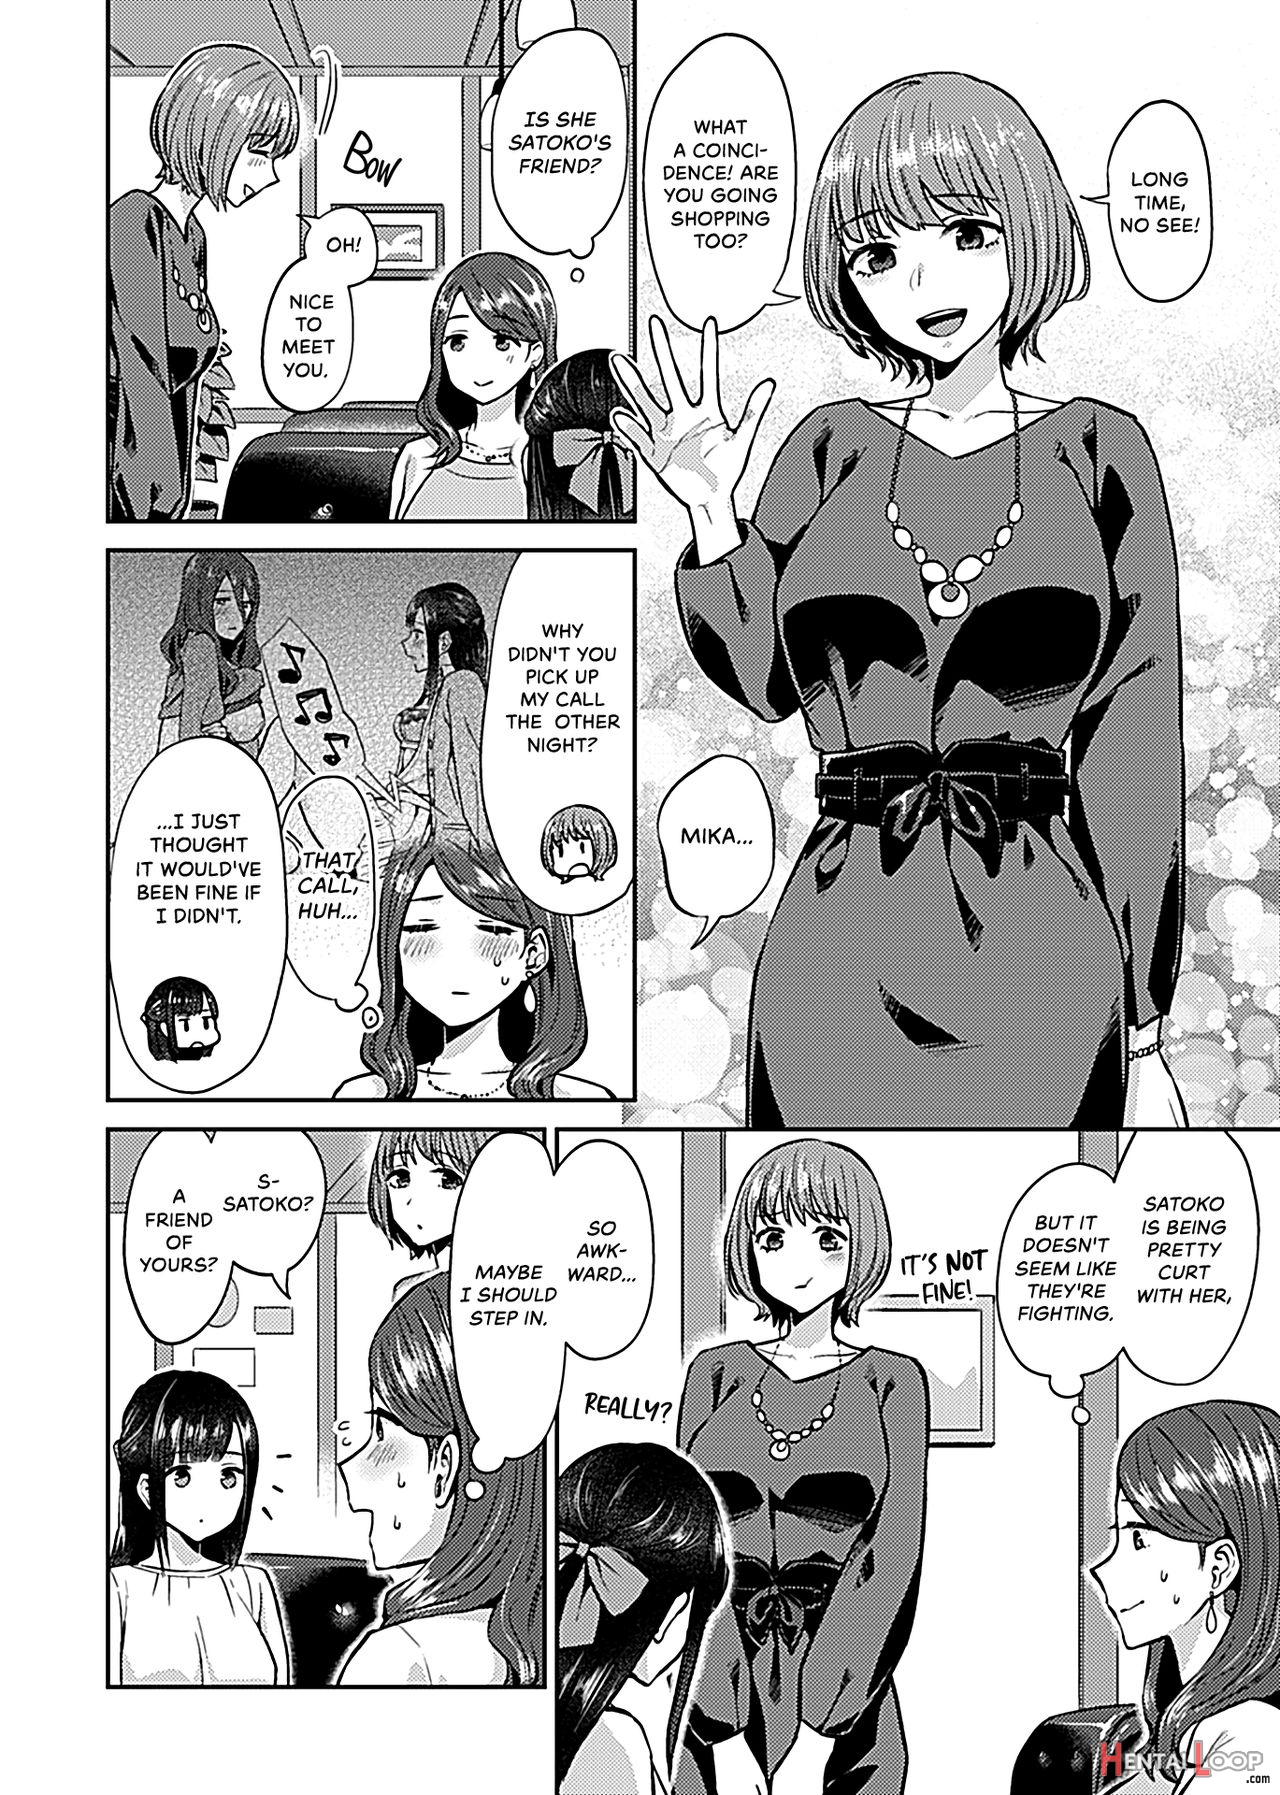 Lilies Are In Full Bloom - Volume 1 page 74